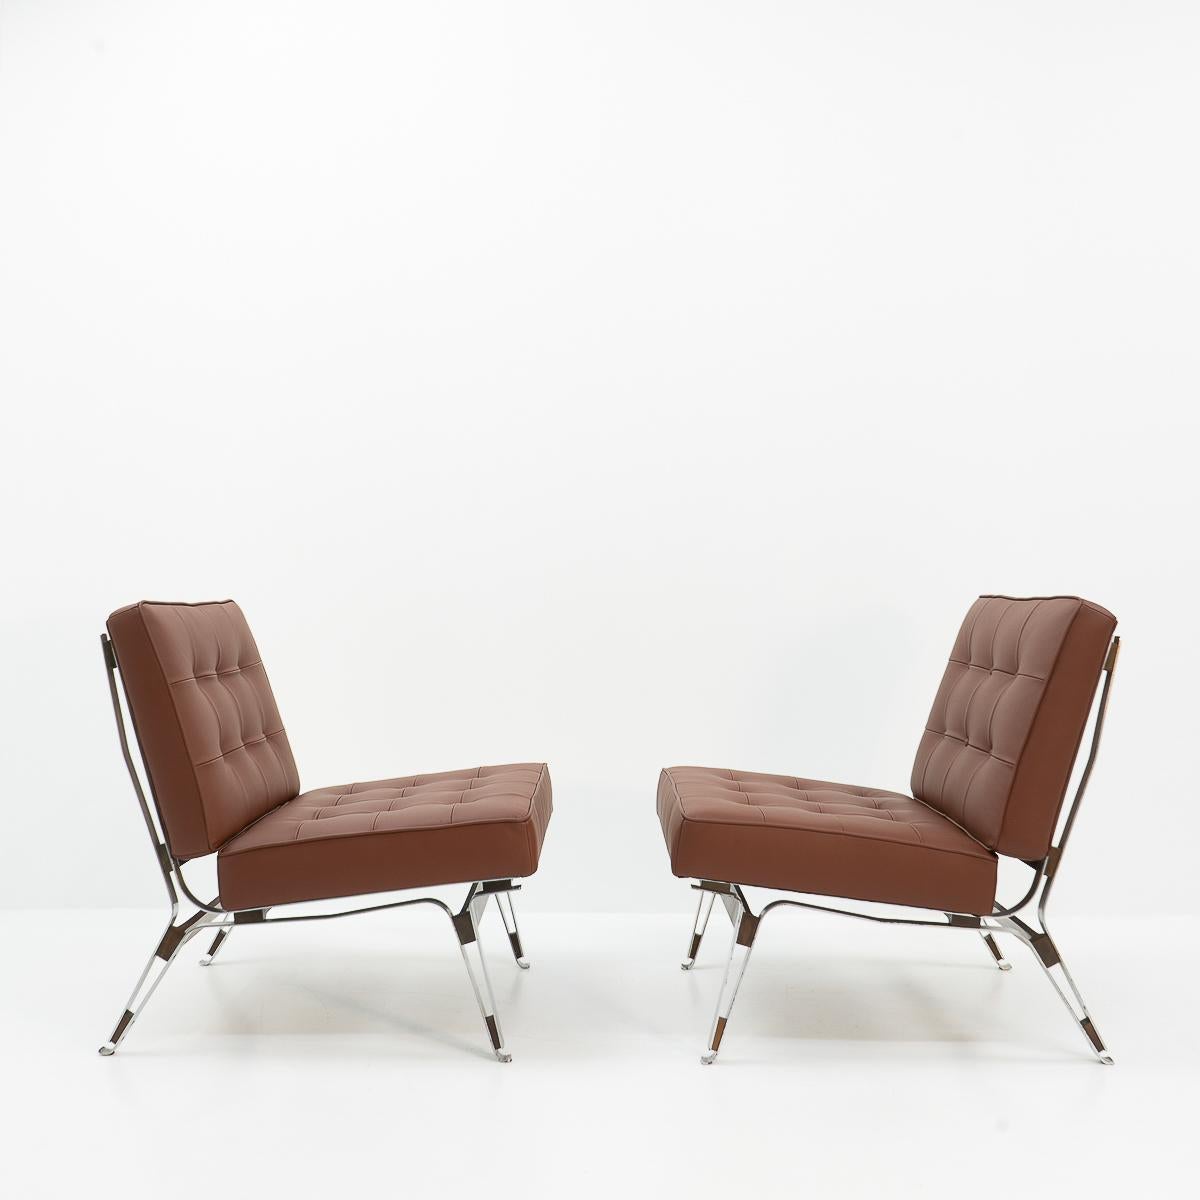 Metal Rare Italian Design: Ico Parisi 856 Lounge Chairs for Cassina, 1950s For Sale